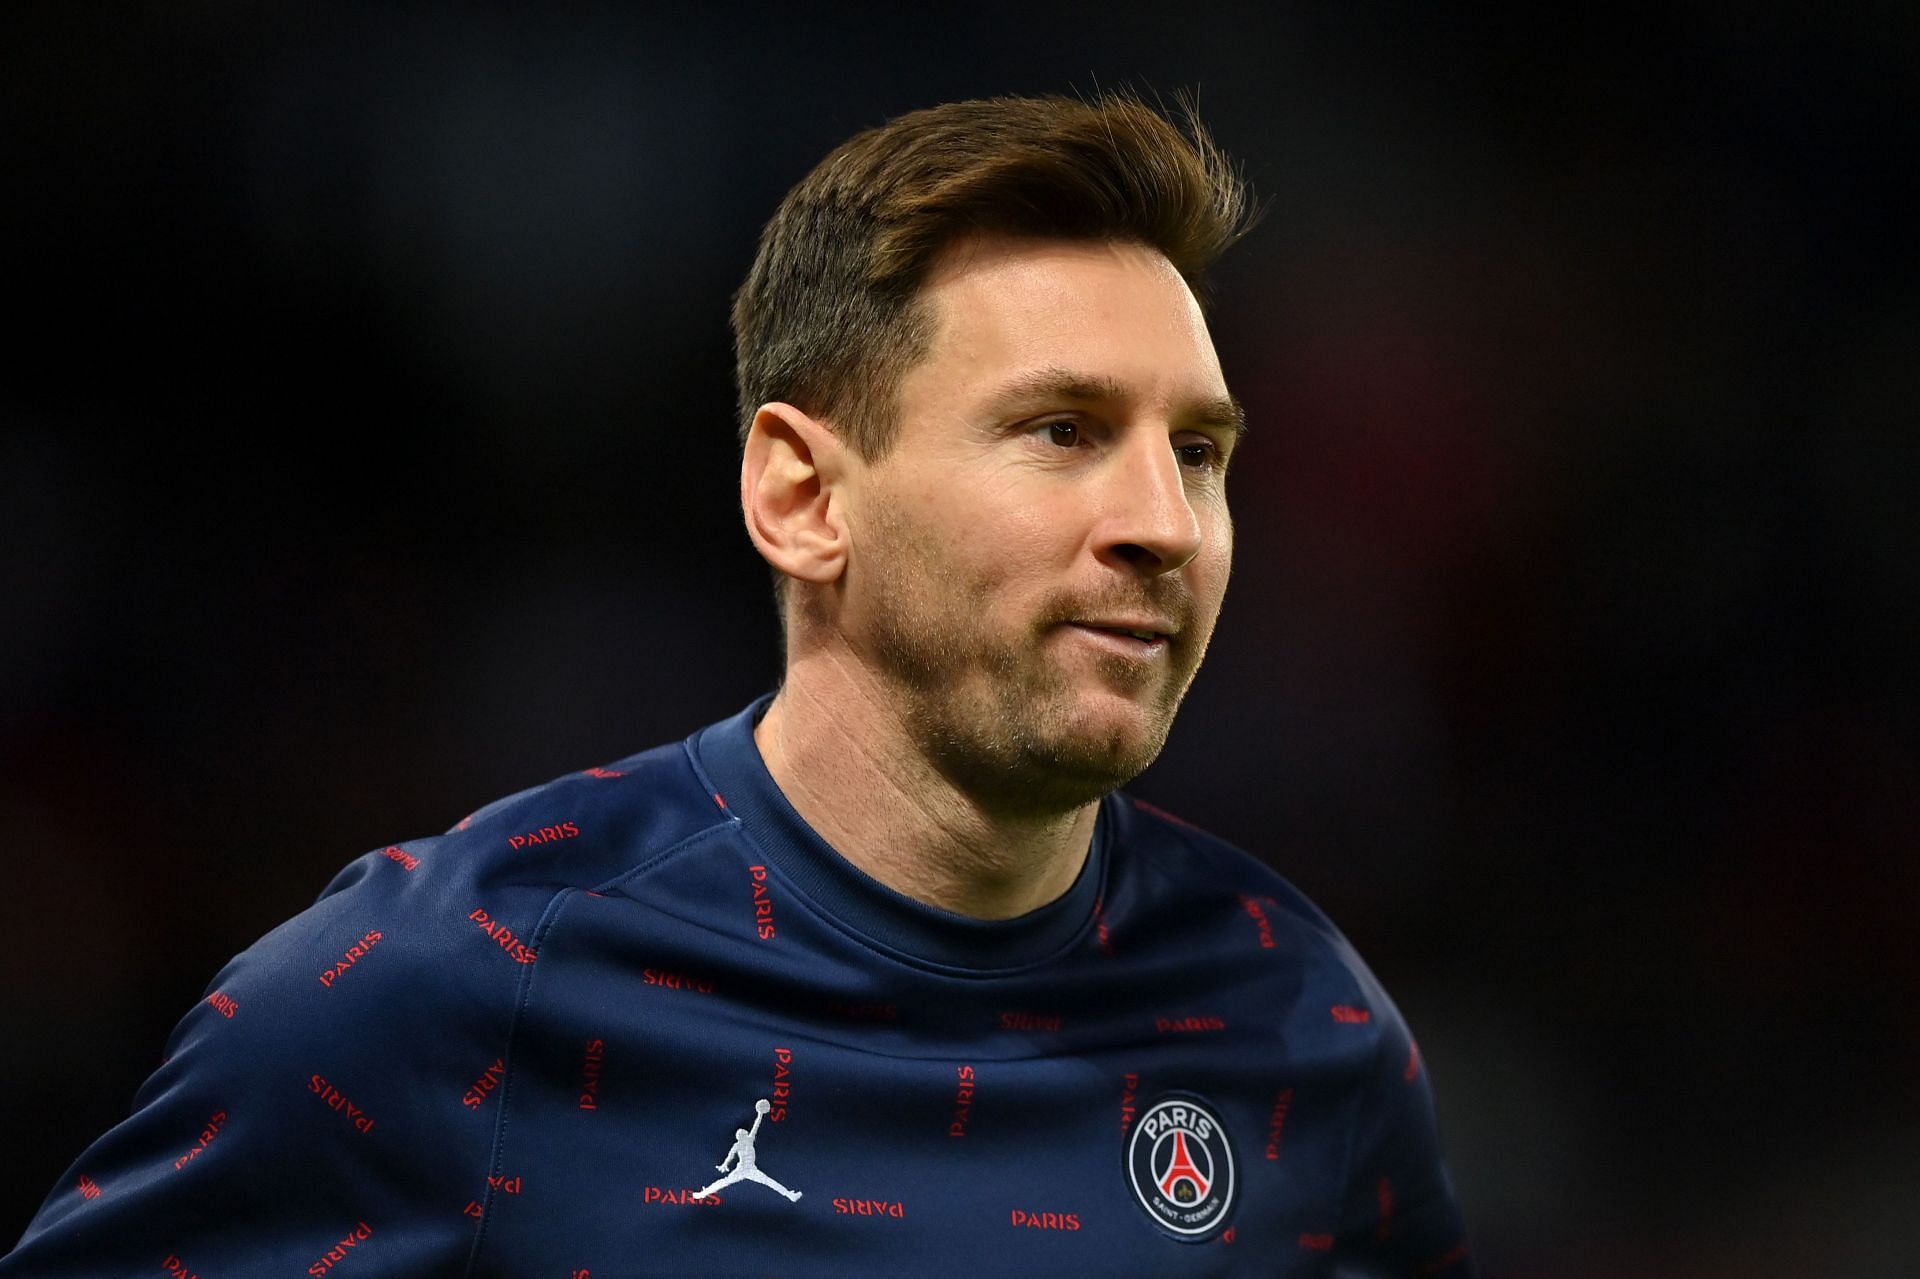 Is Lionel Messi playing for PSG against Nantes tomorrow?